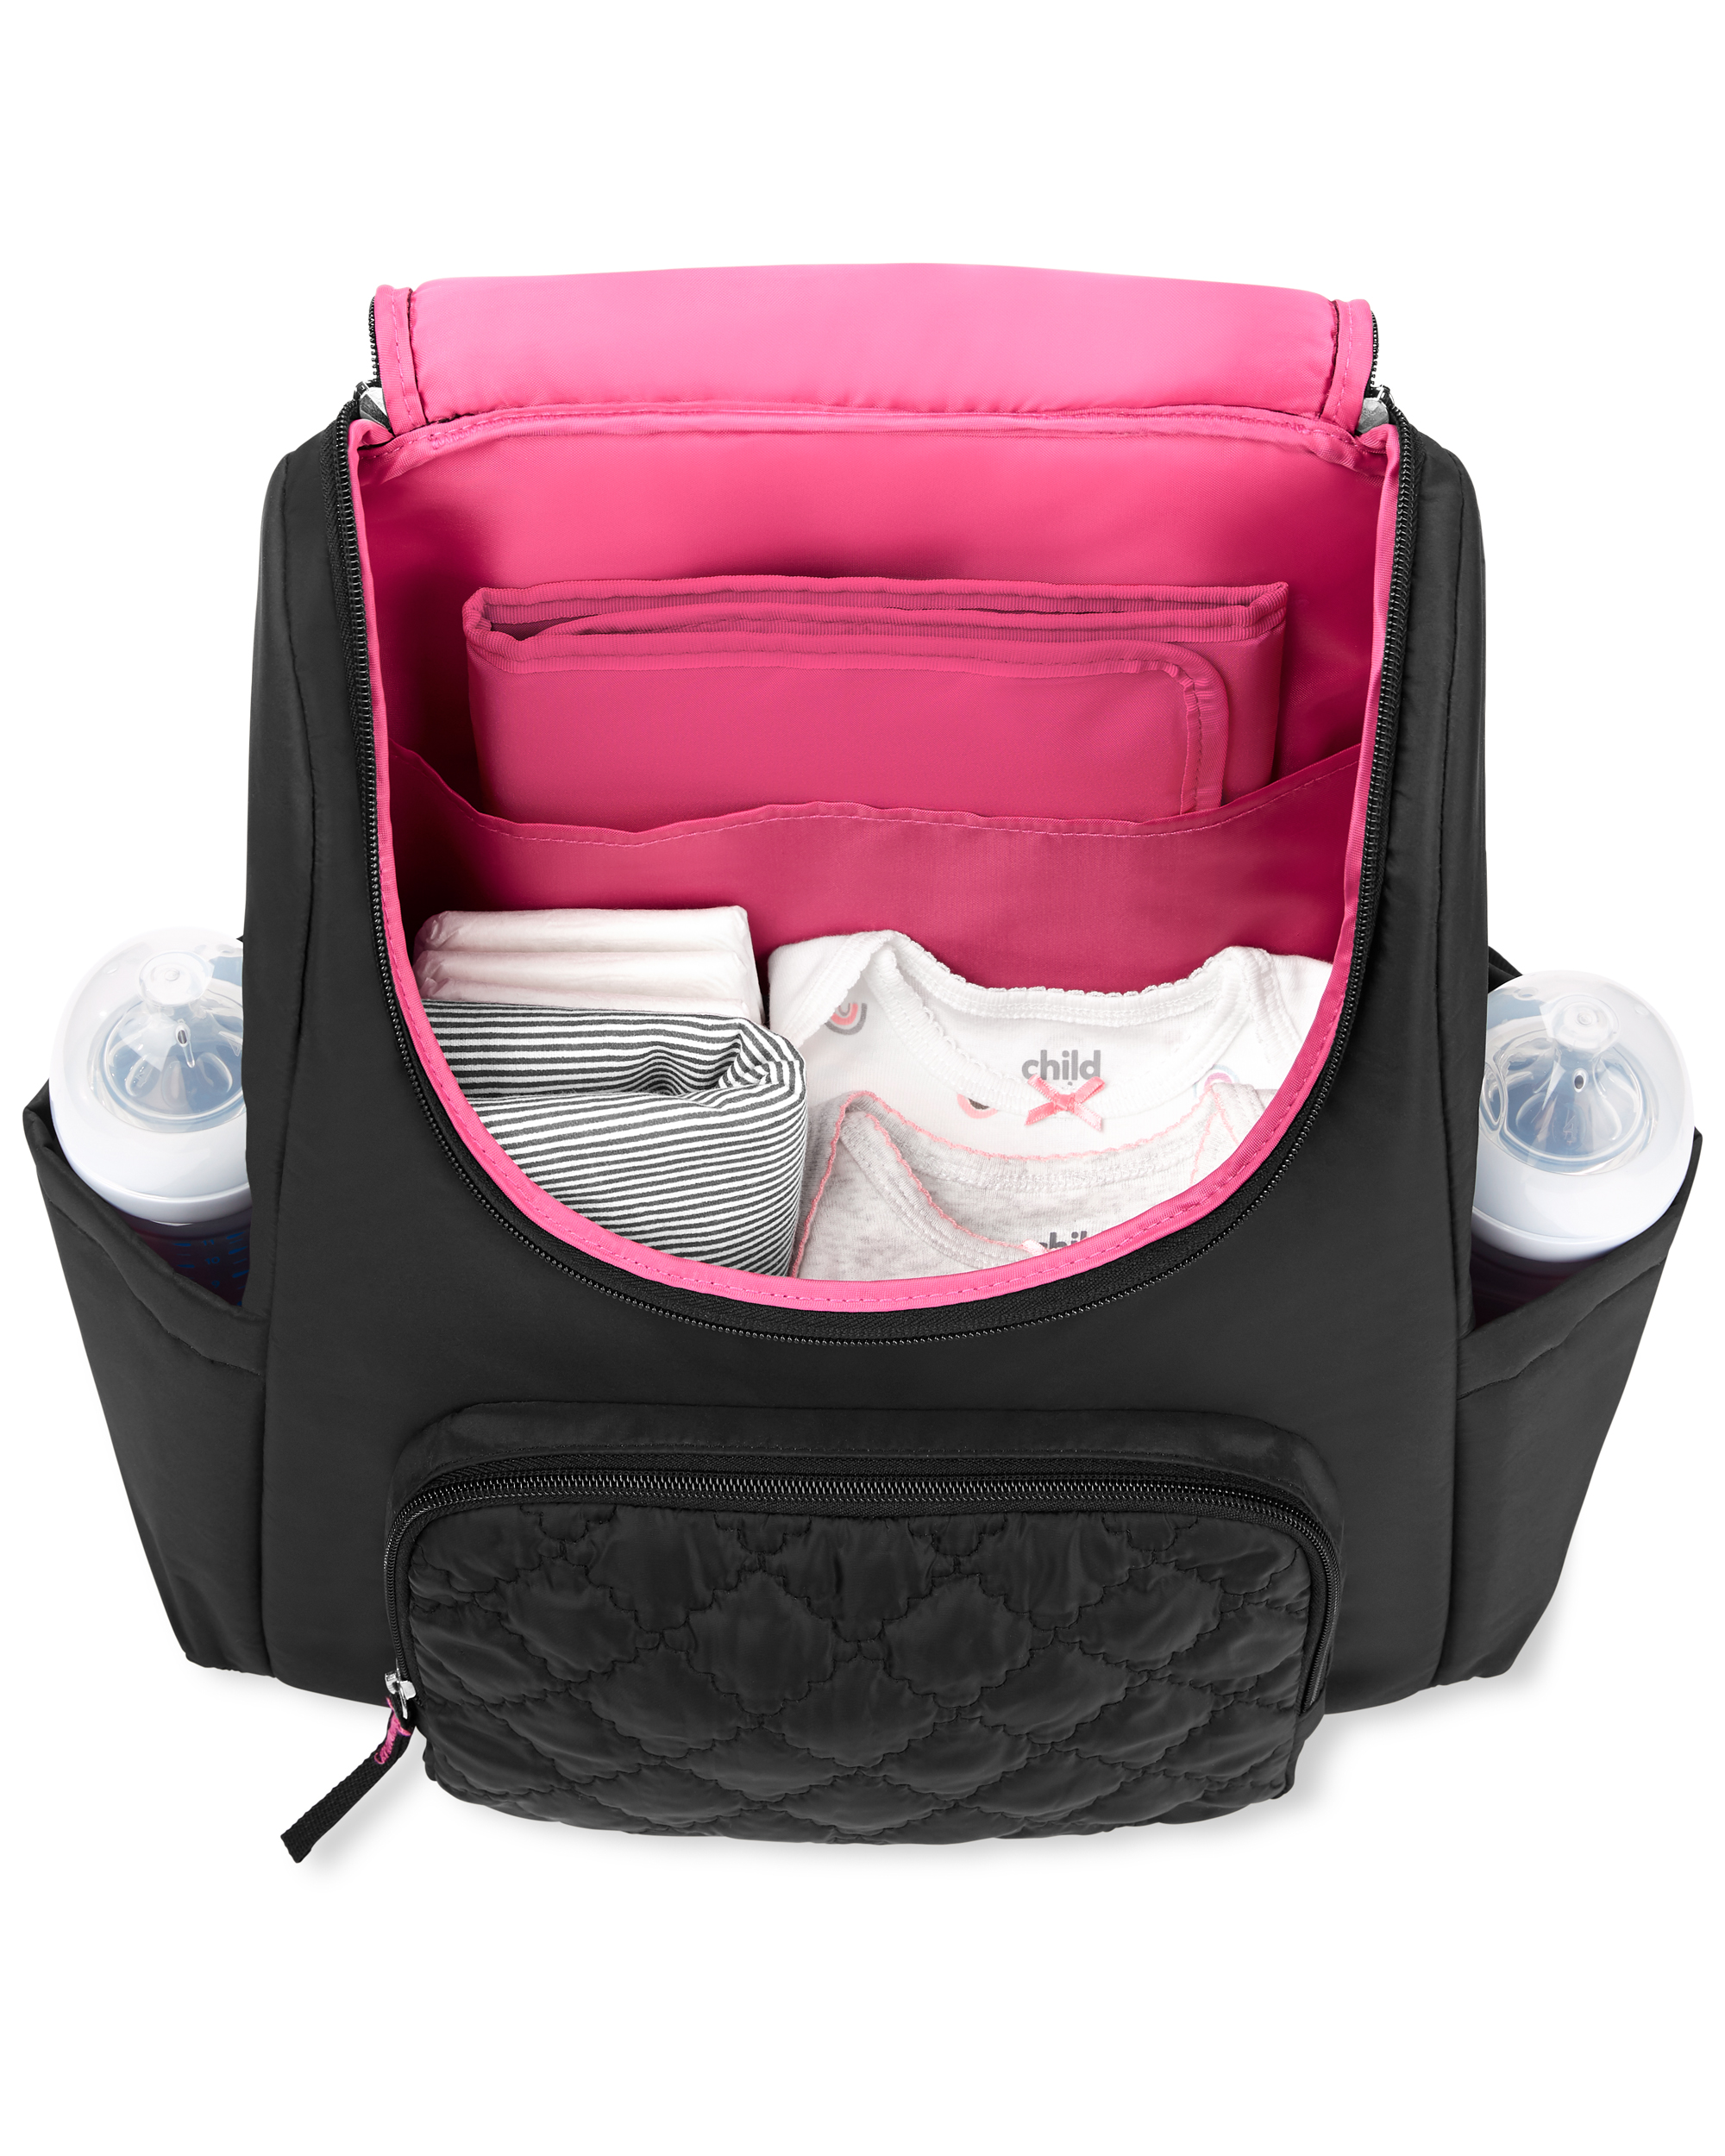 Child of Mine by Carter's Changing Pad Included Backpack Diaper Bag, Black Quilted - image 4 of 12